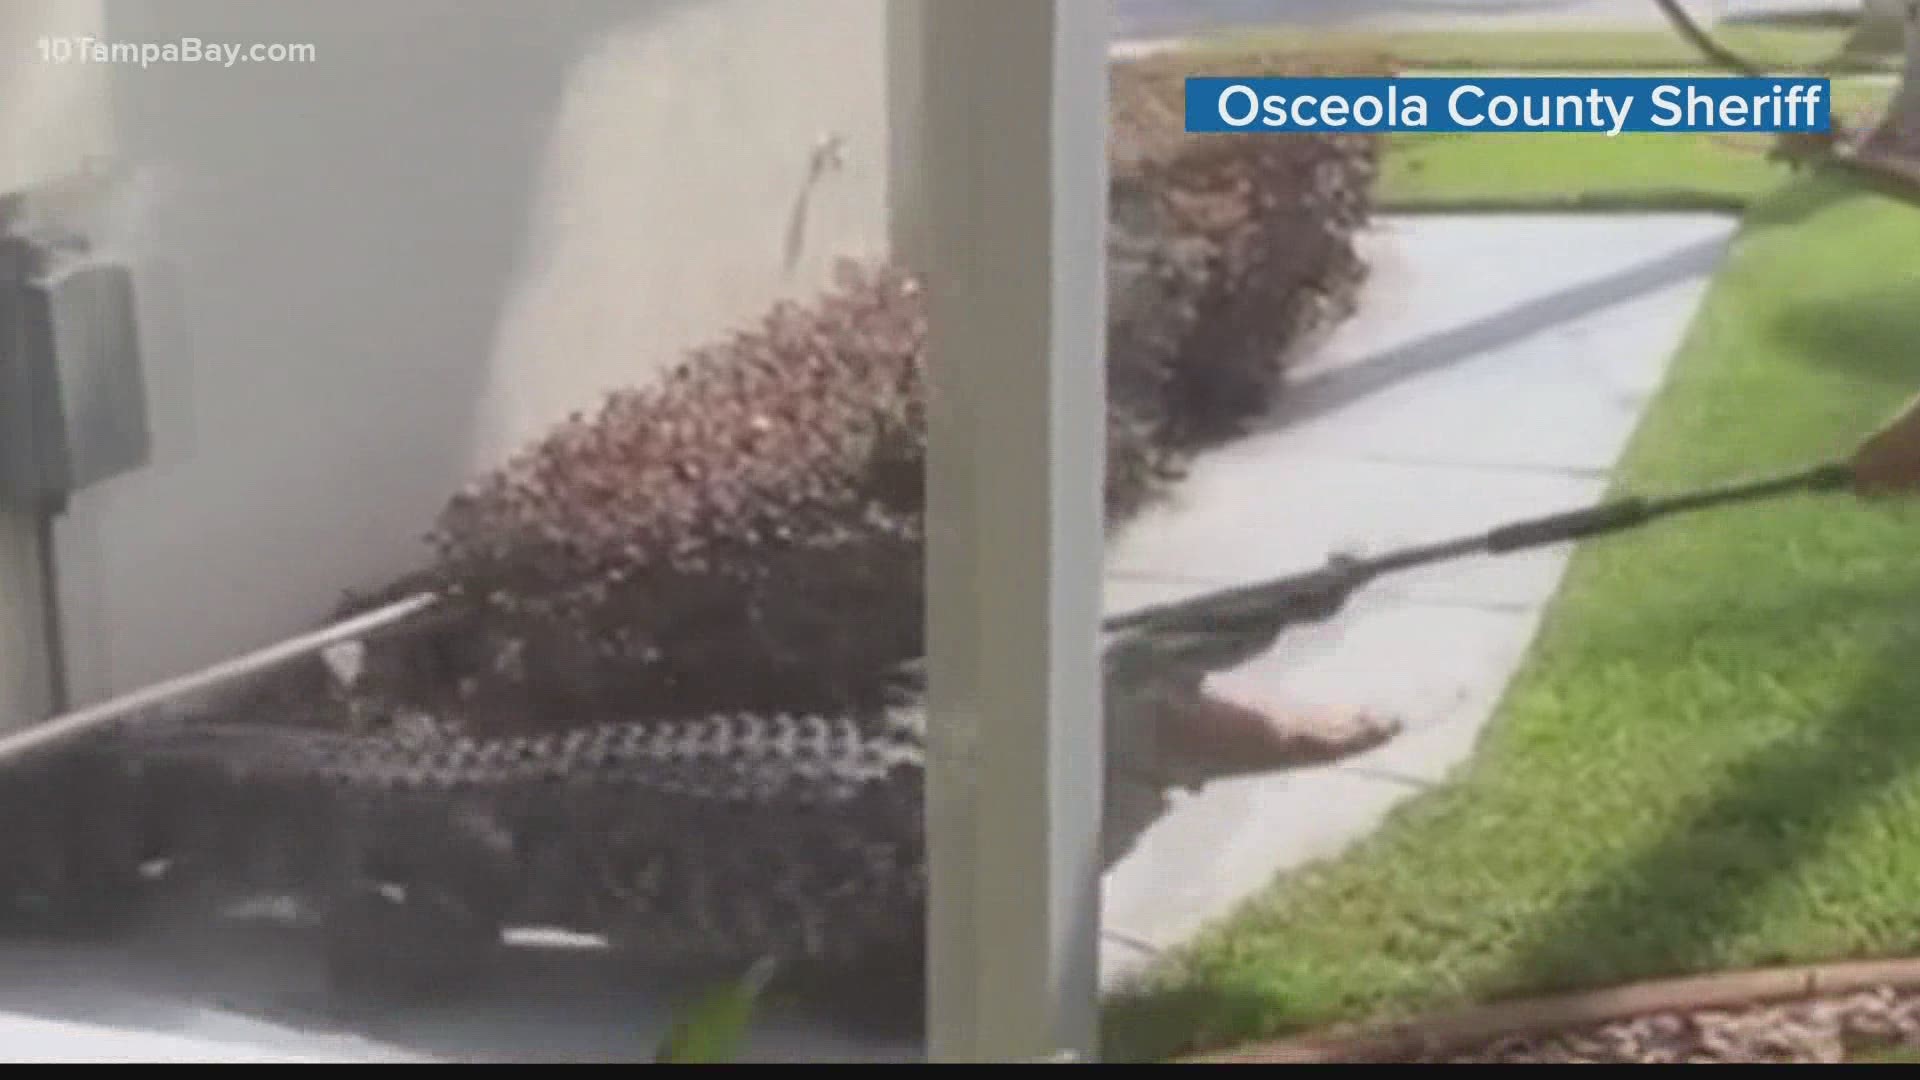 The Osceola County Sheriff's Office says the massive reptile put up a good fight but was able to be taken into custody.